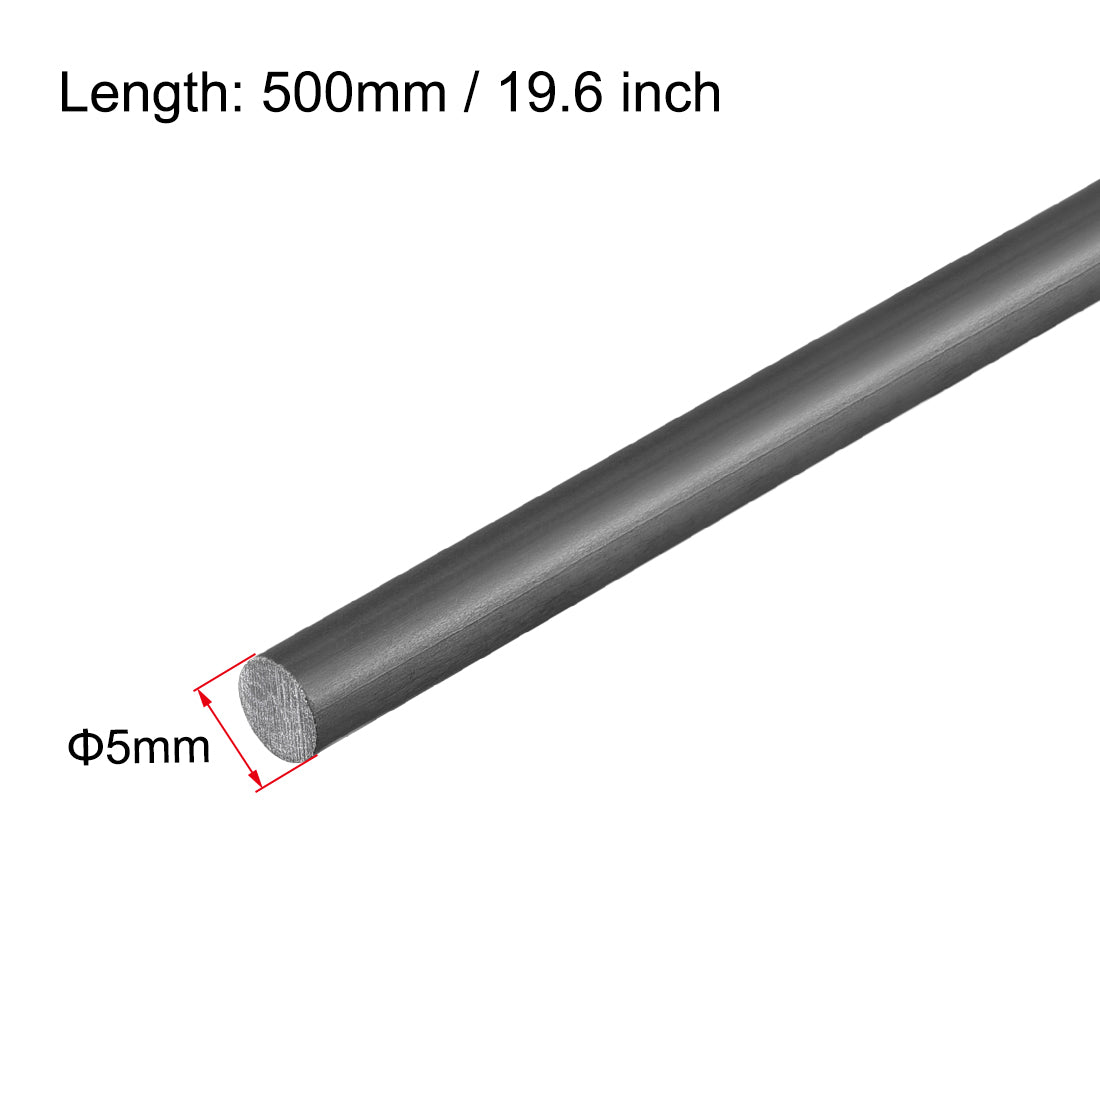 Uxcell Uxcell Carbon Fiber Rod 6mm, 500mm/19.6inch Length for RC Airplane Matte Pole